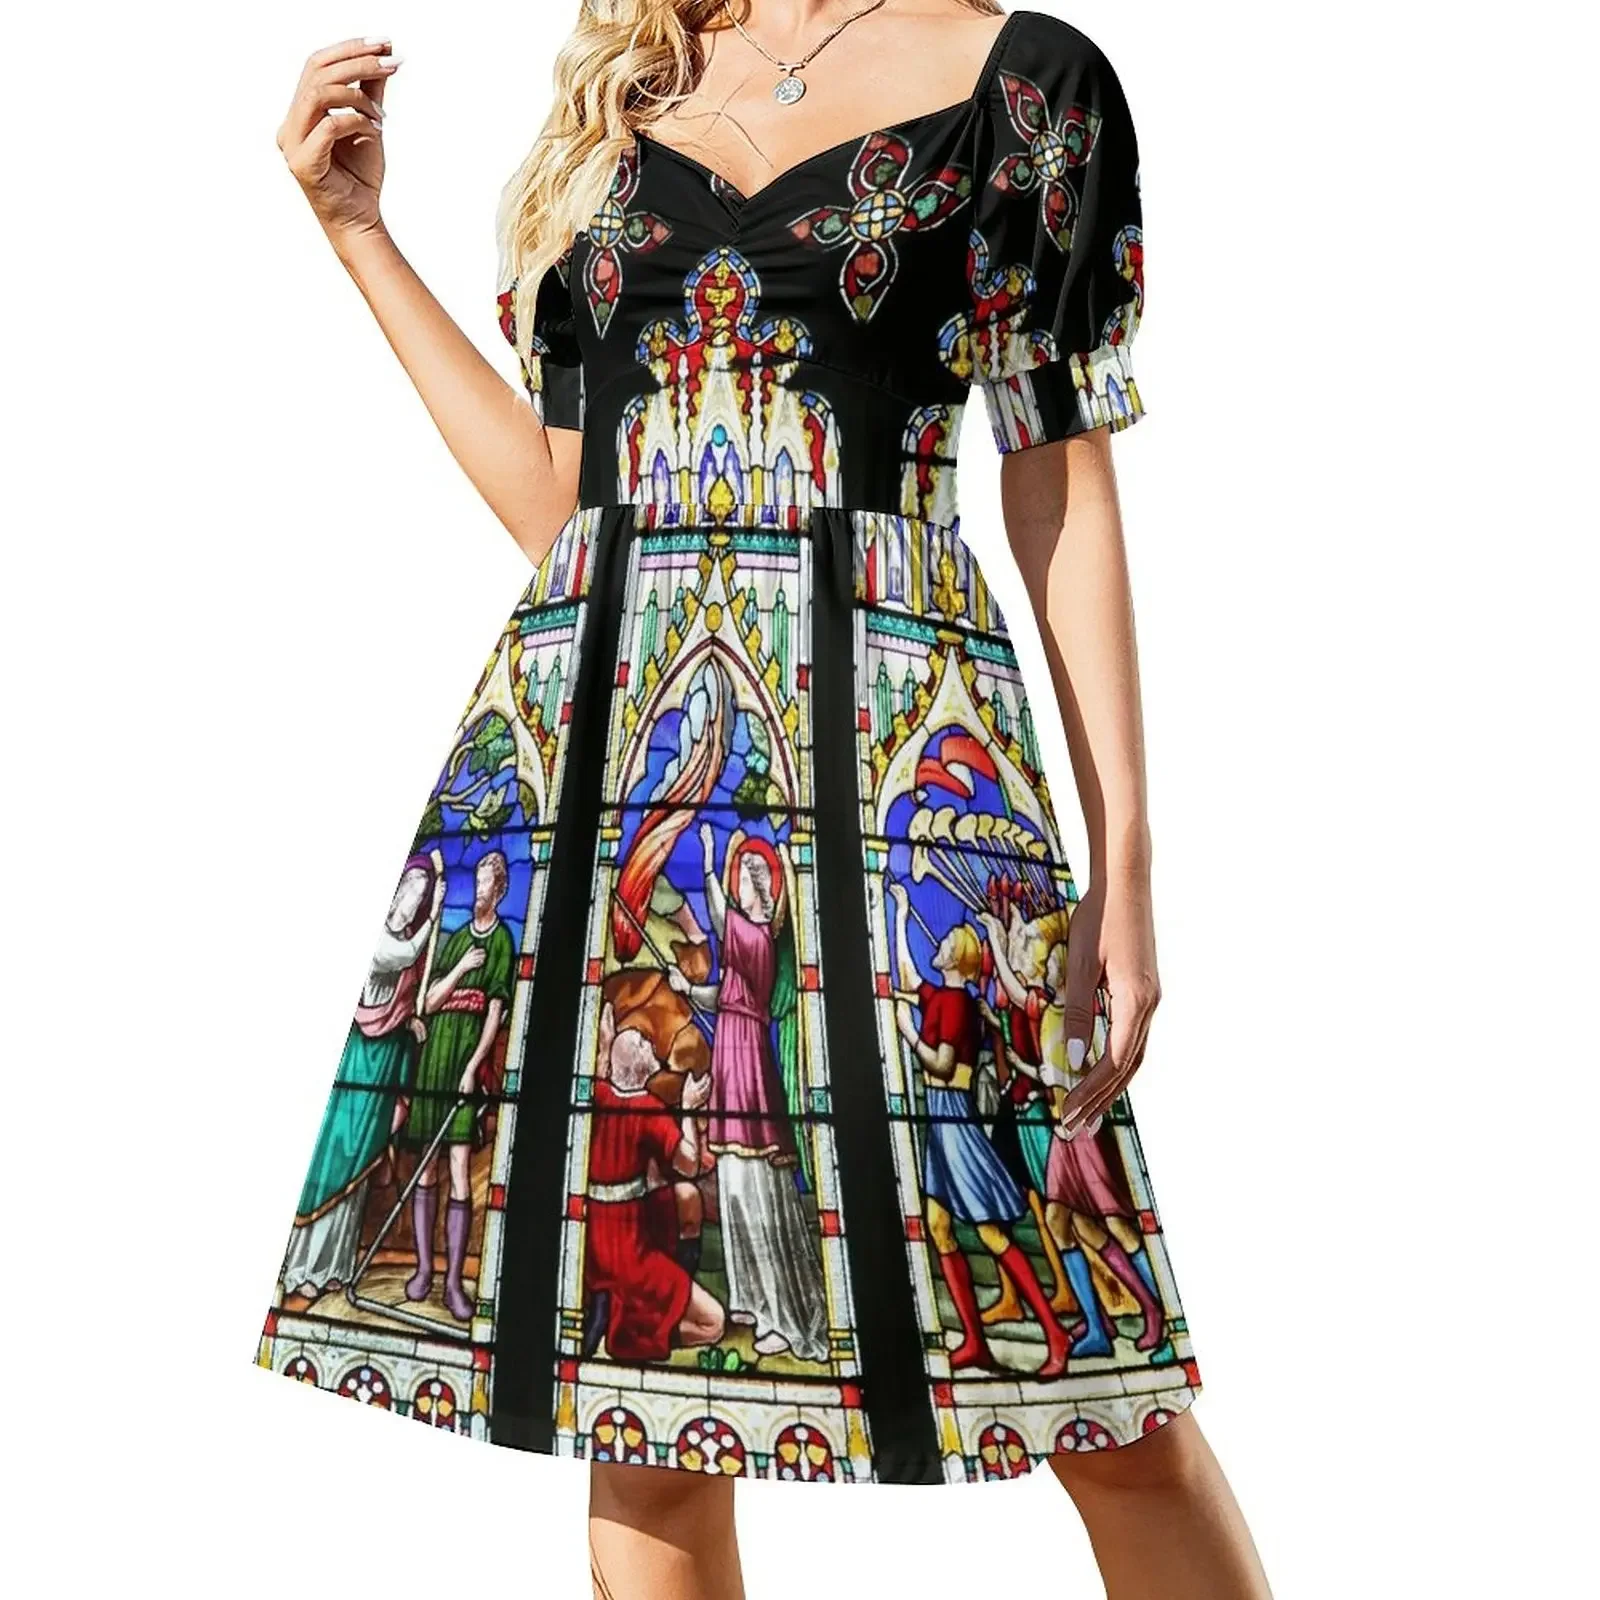 

Cathedral Stained Glass 3 Sleeveless Dress Dresses for wedding party Women's dress